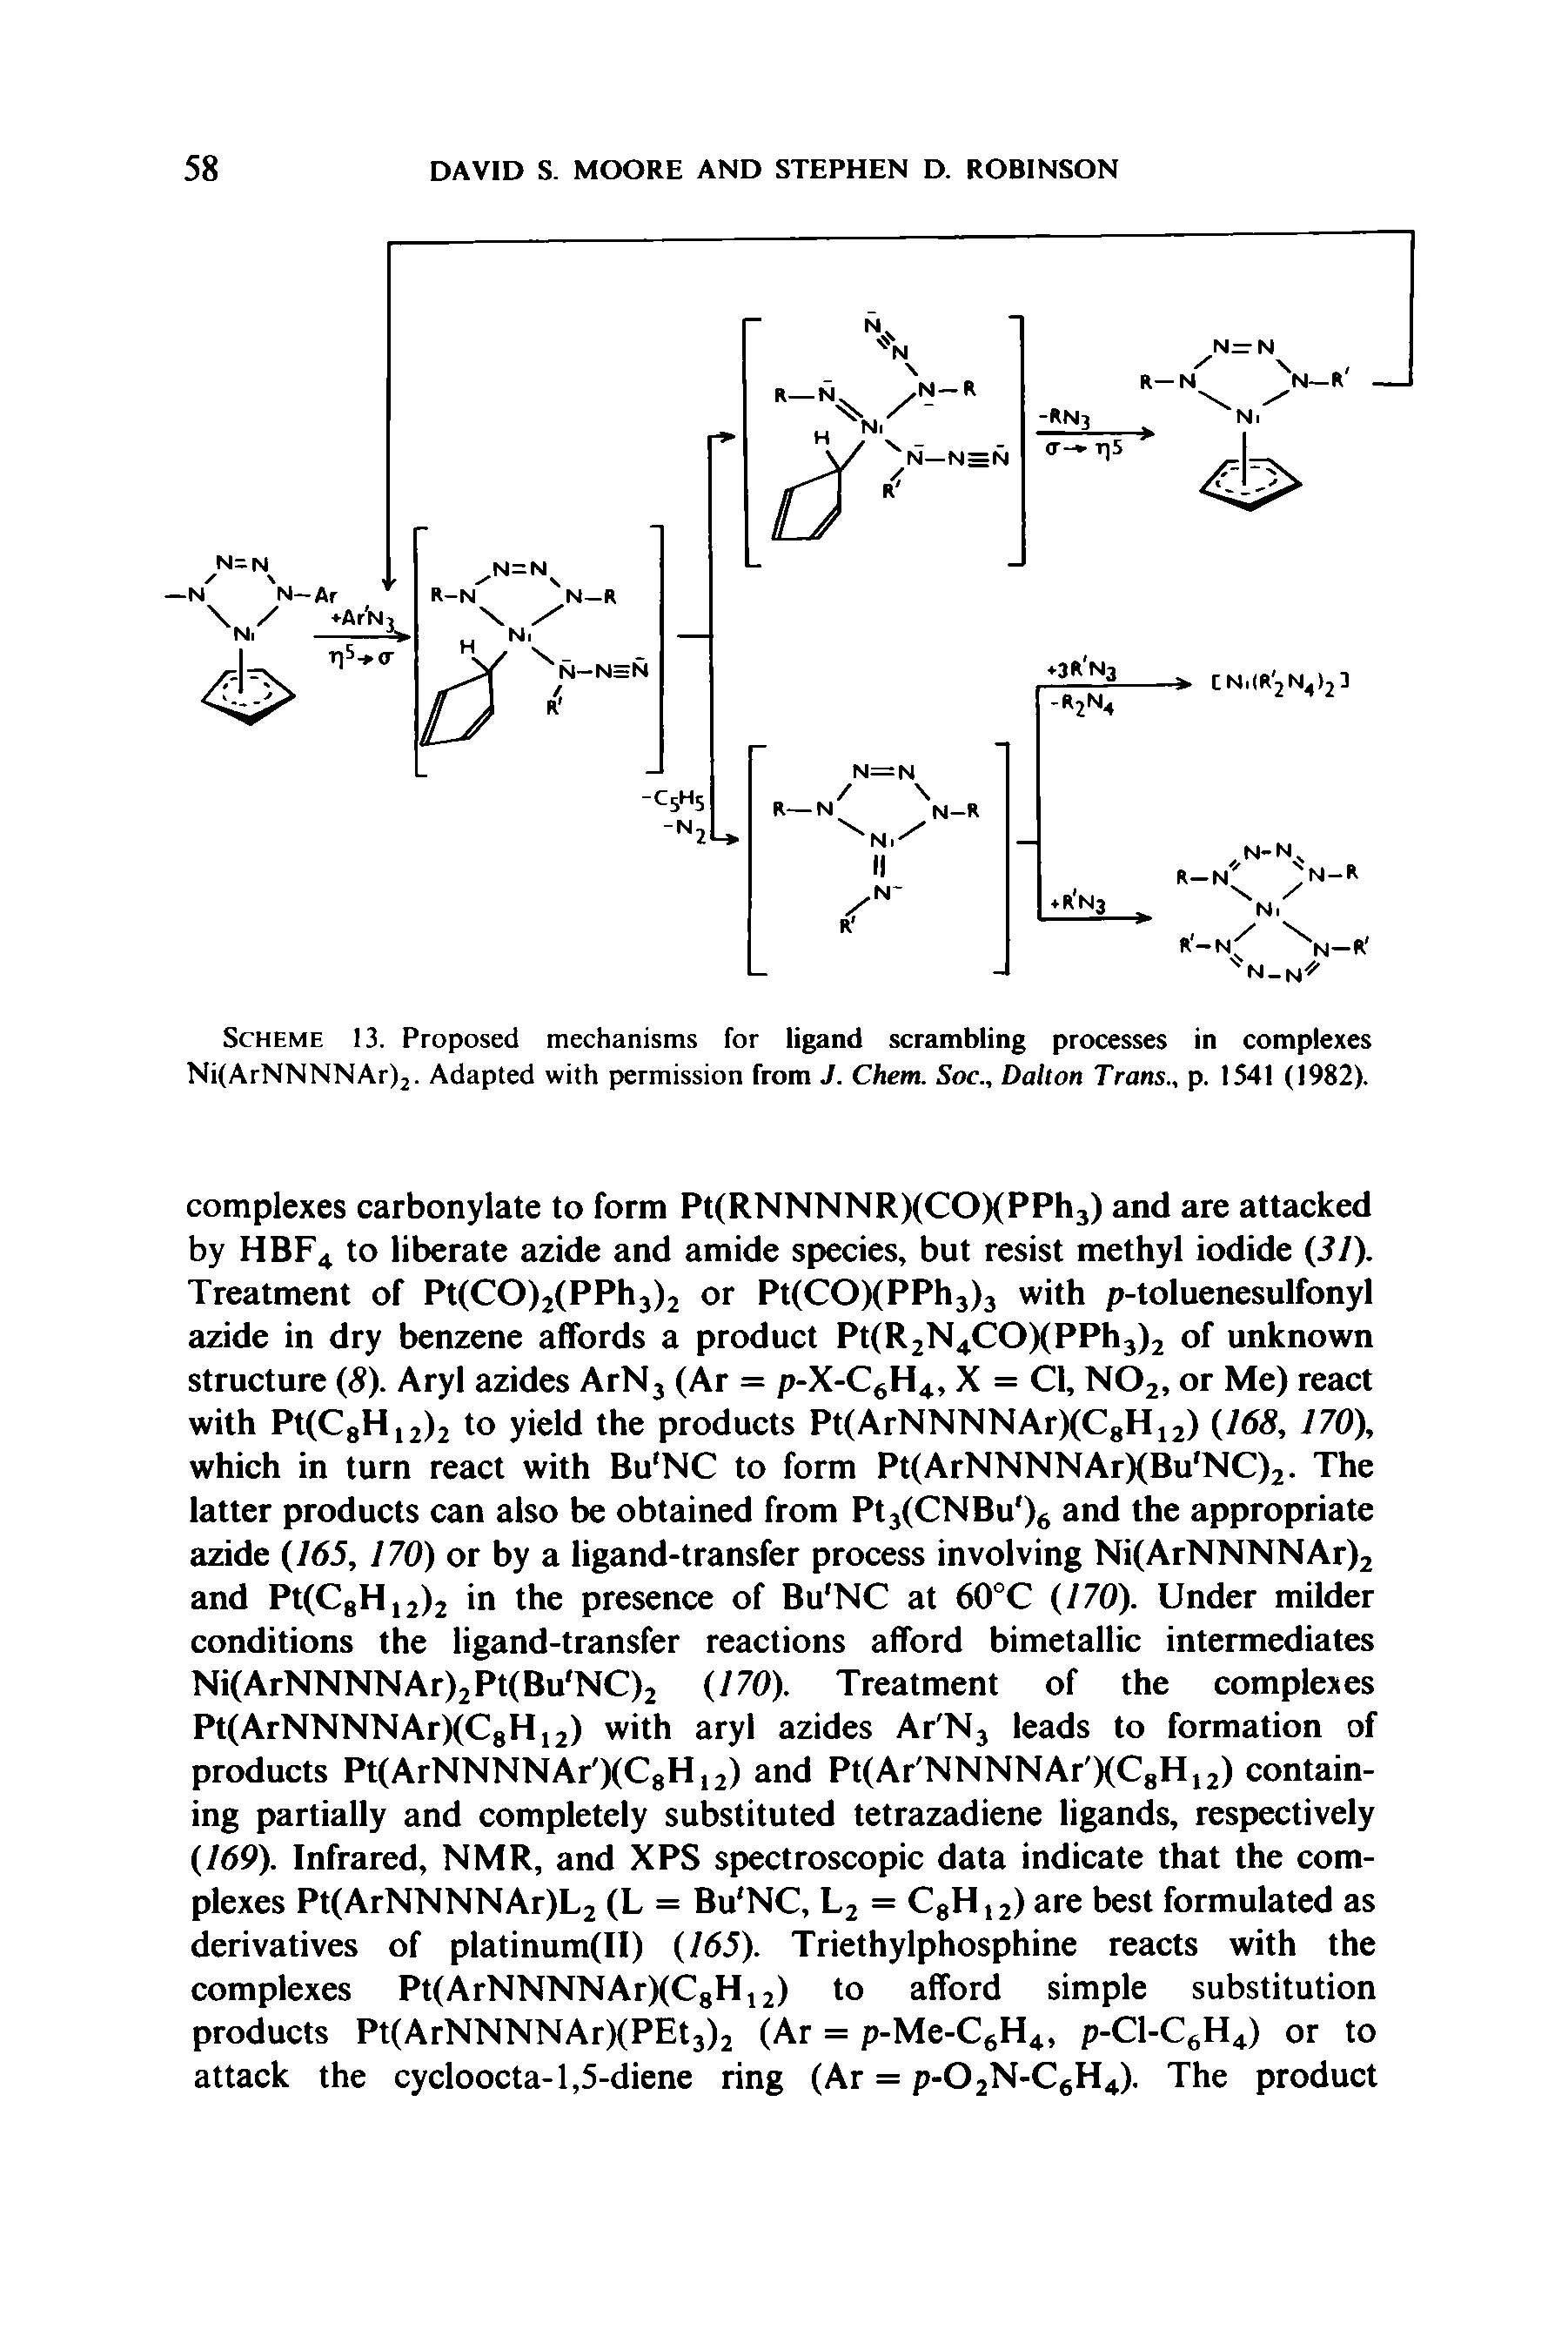 Scheme 13. Proposed mechanisms for ligand scrambling processes in complexes Ni(ArNNNNAr)2- Adapted with permission from J. Chem. Soc., Dalton Trans., p. 1541 (1982).